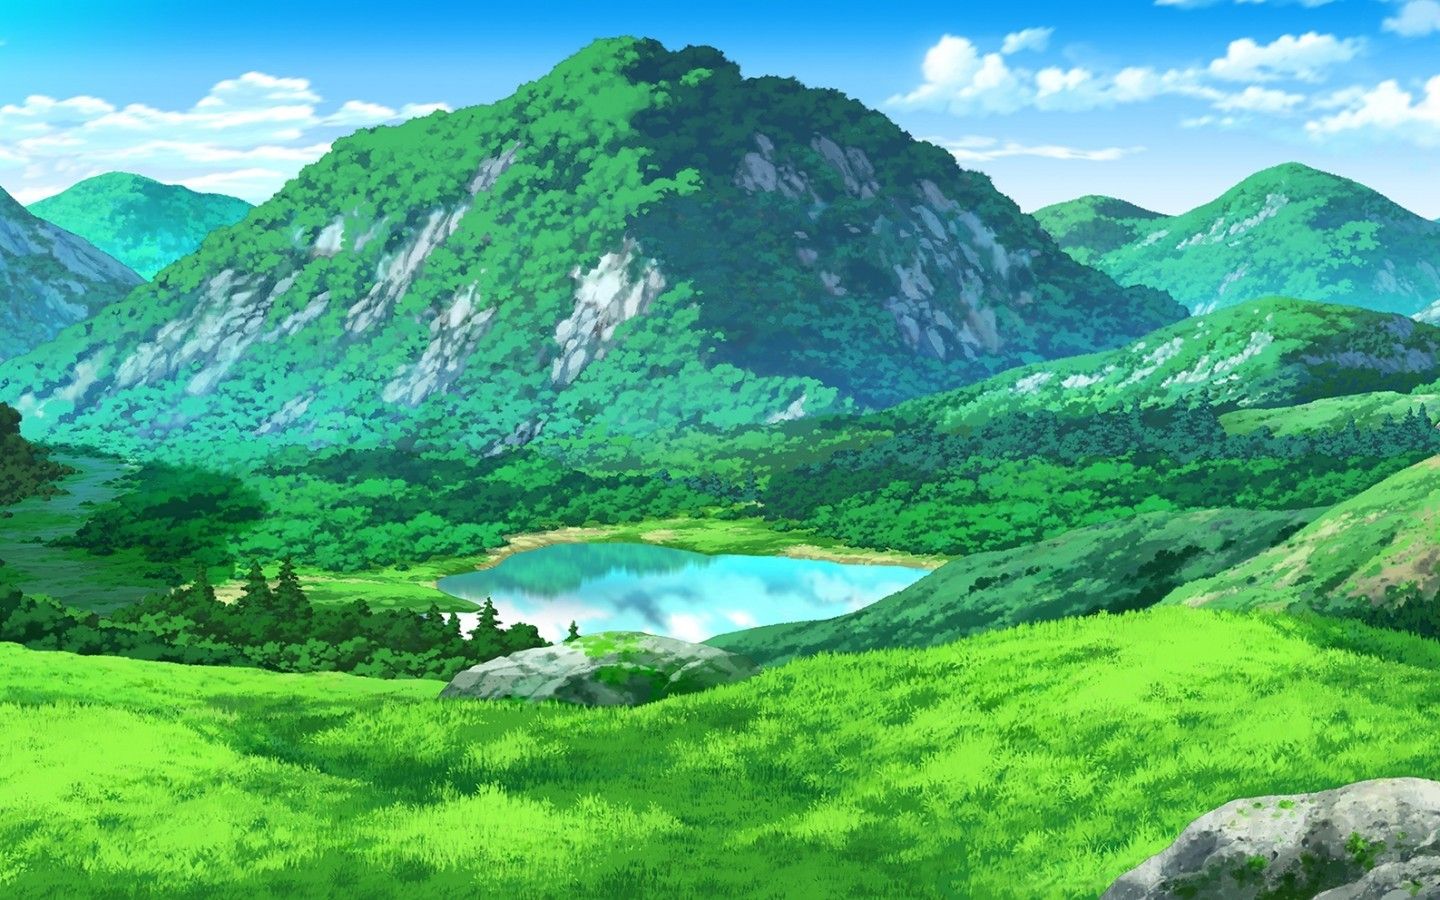 HD wallpaper of Japense landscape in the style of the Dororo Anime